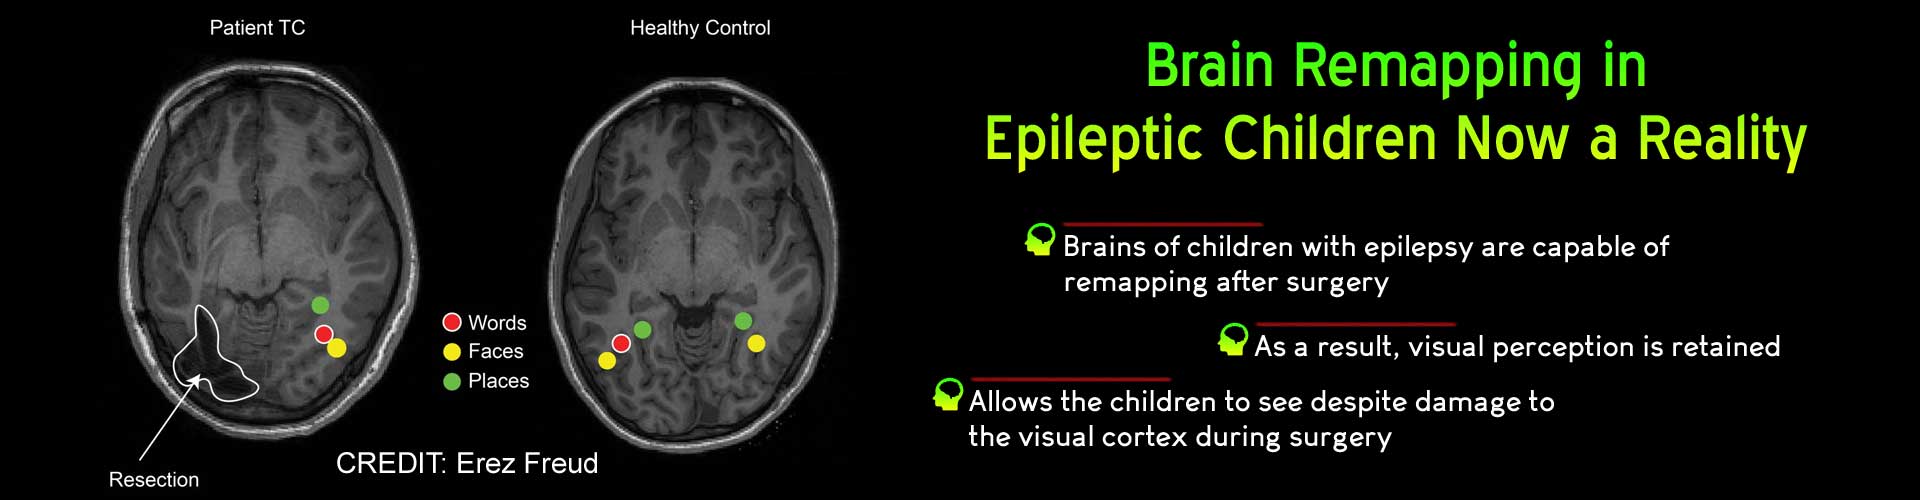 Children With Epilepsy can Retain Visual Perception After Surgery: Here's How
